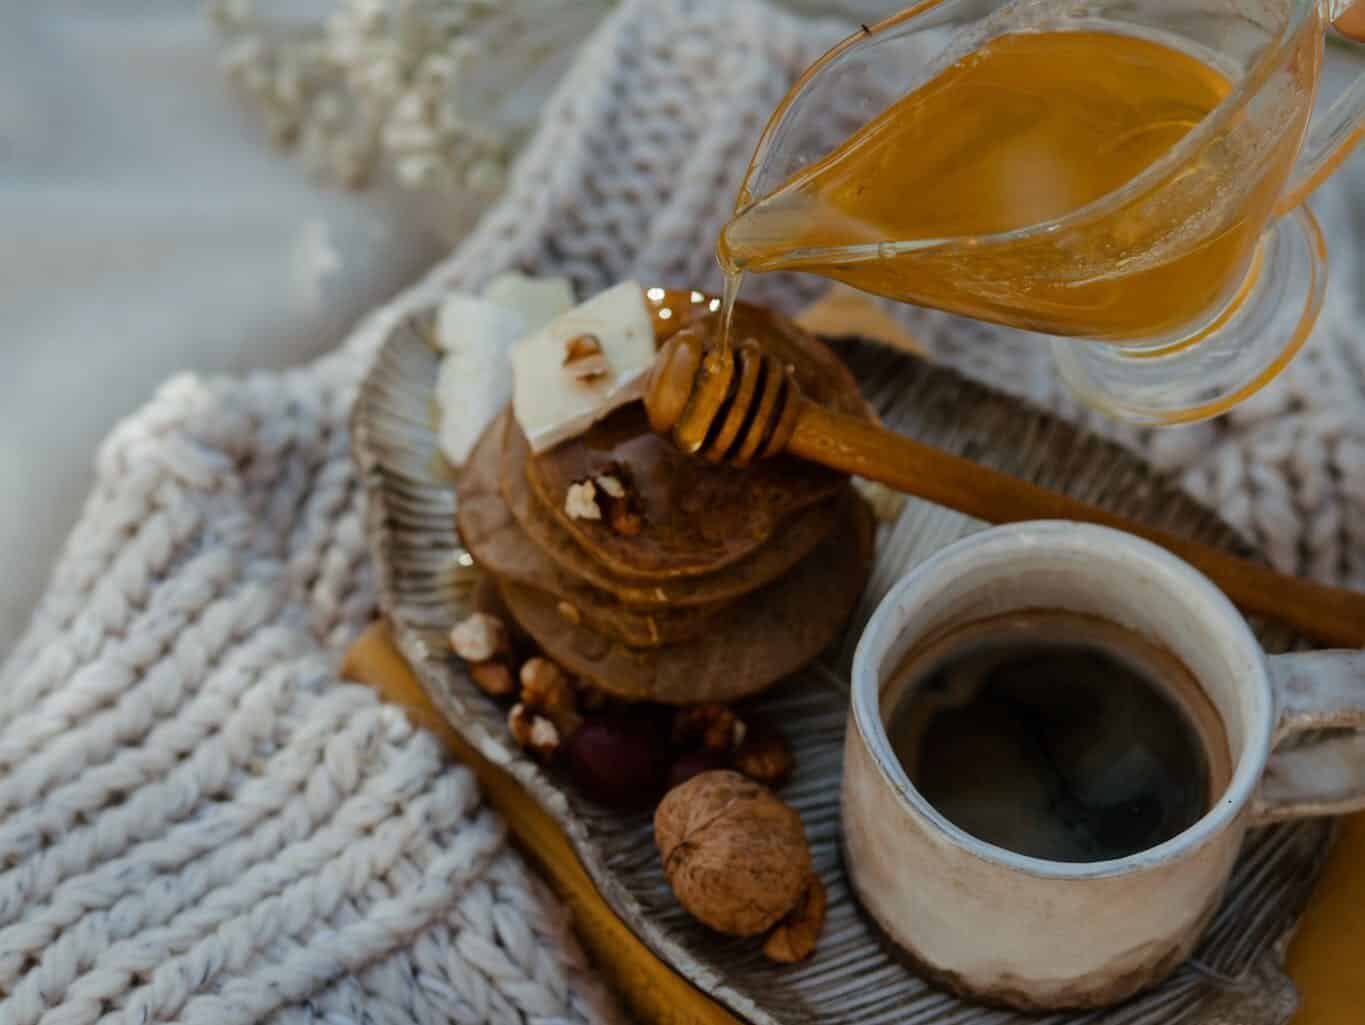 Honey for soothing cough or relaxation